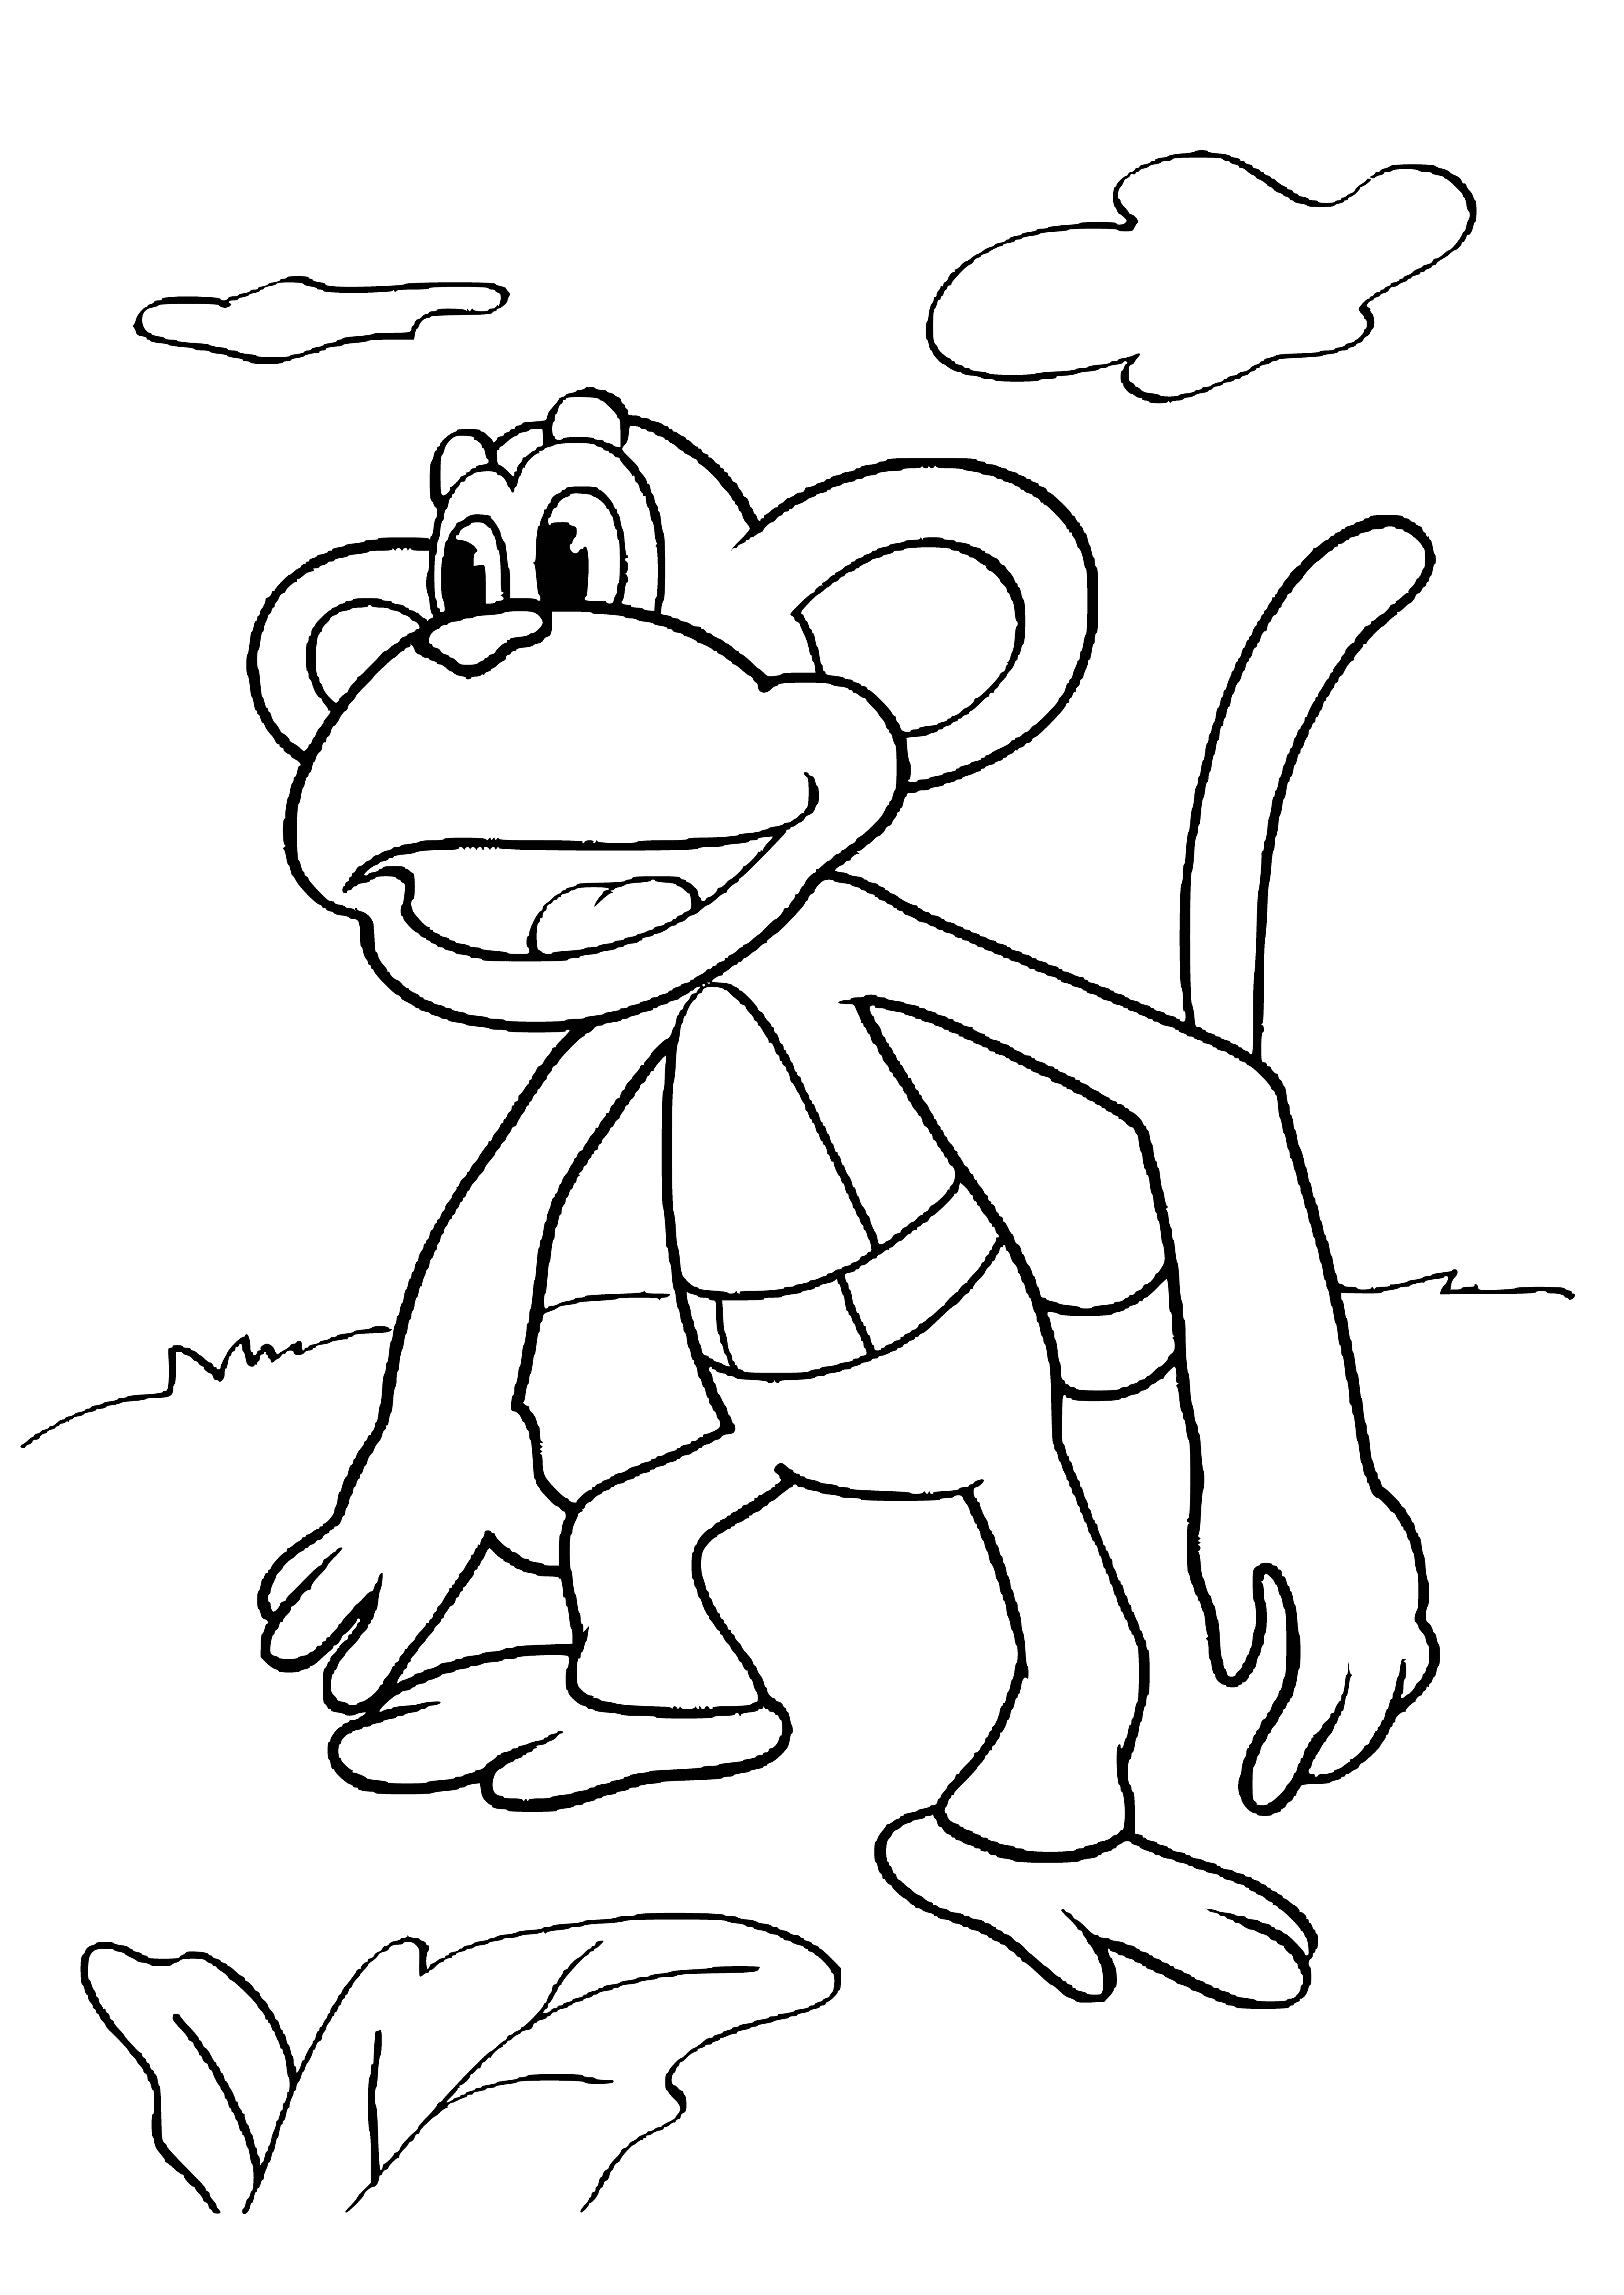 coloring page: Two monkeys show love on a tree branch: brown one holds cream-colored one in its arms.